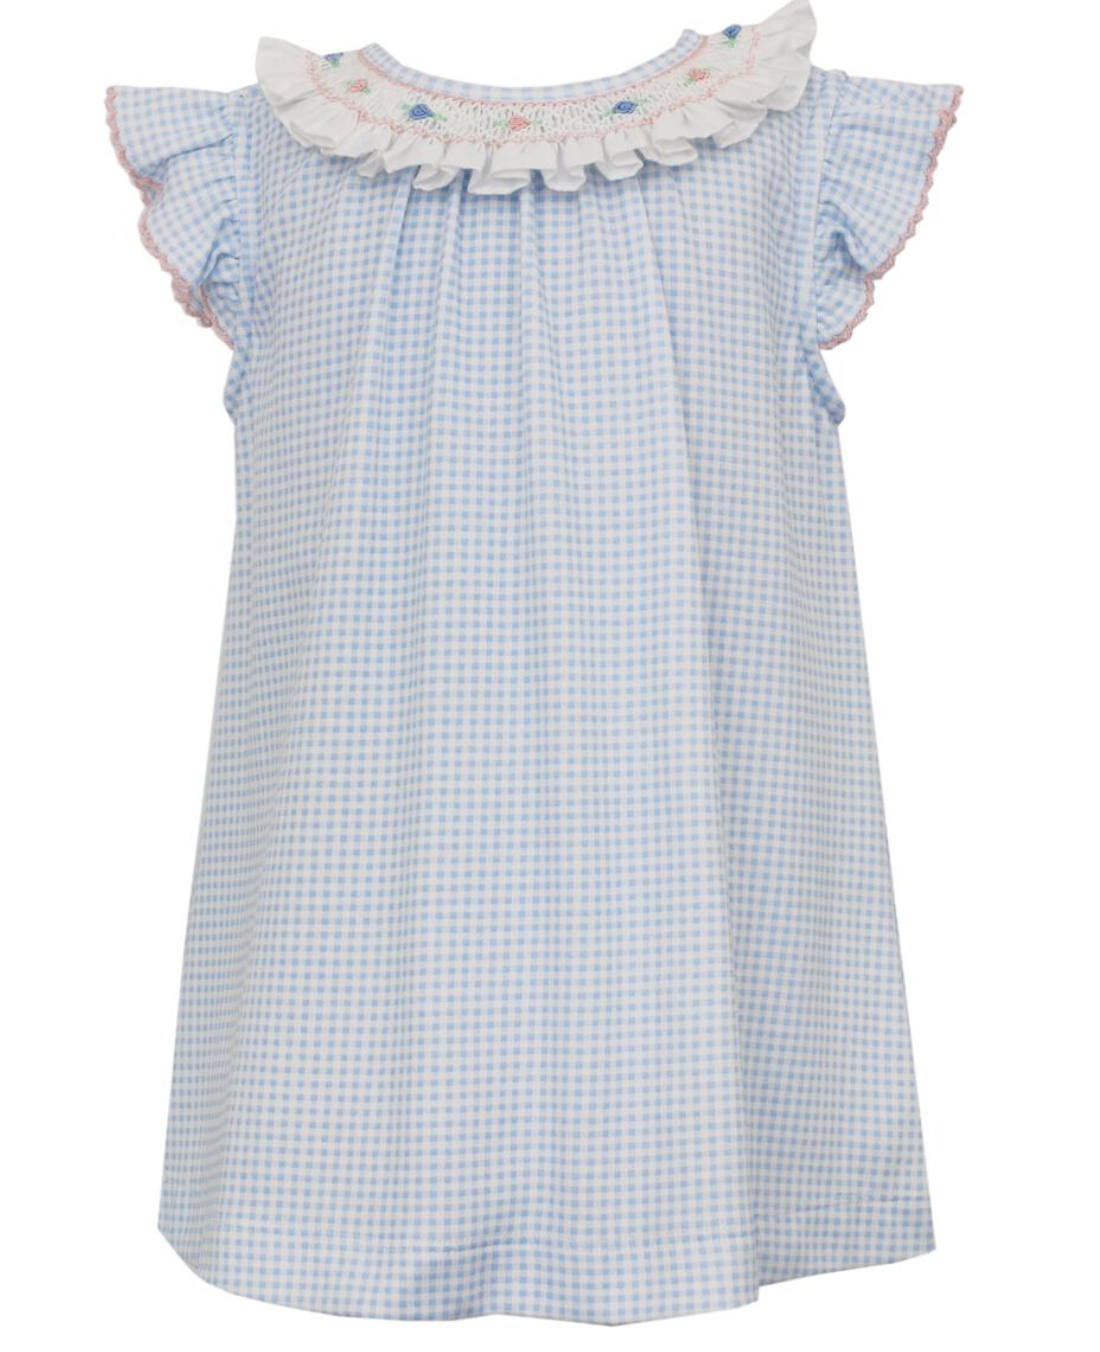 Pricilla - A-Line Dress  - Pleated Smocked Collar -Blue Gingham